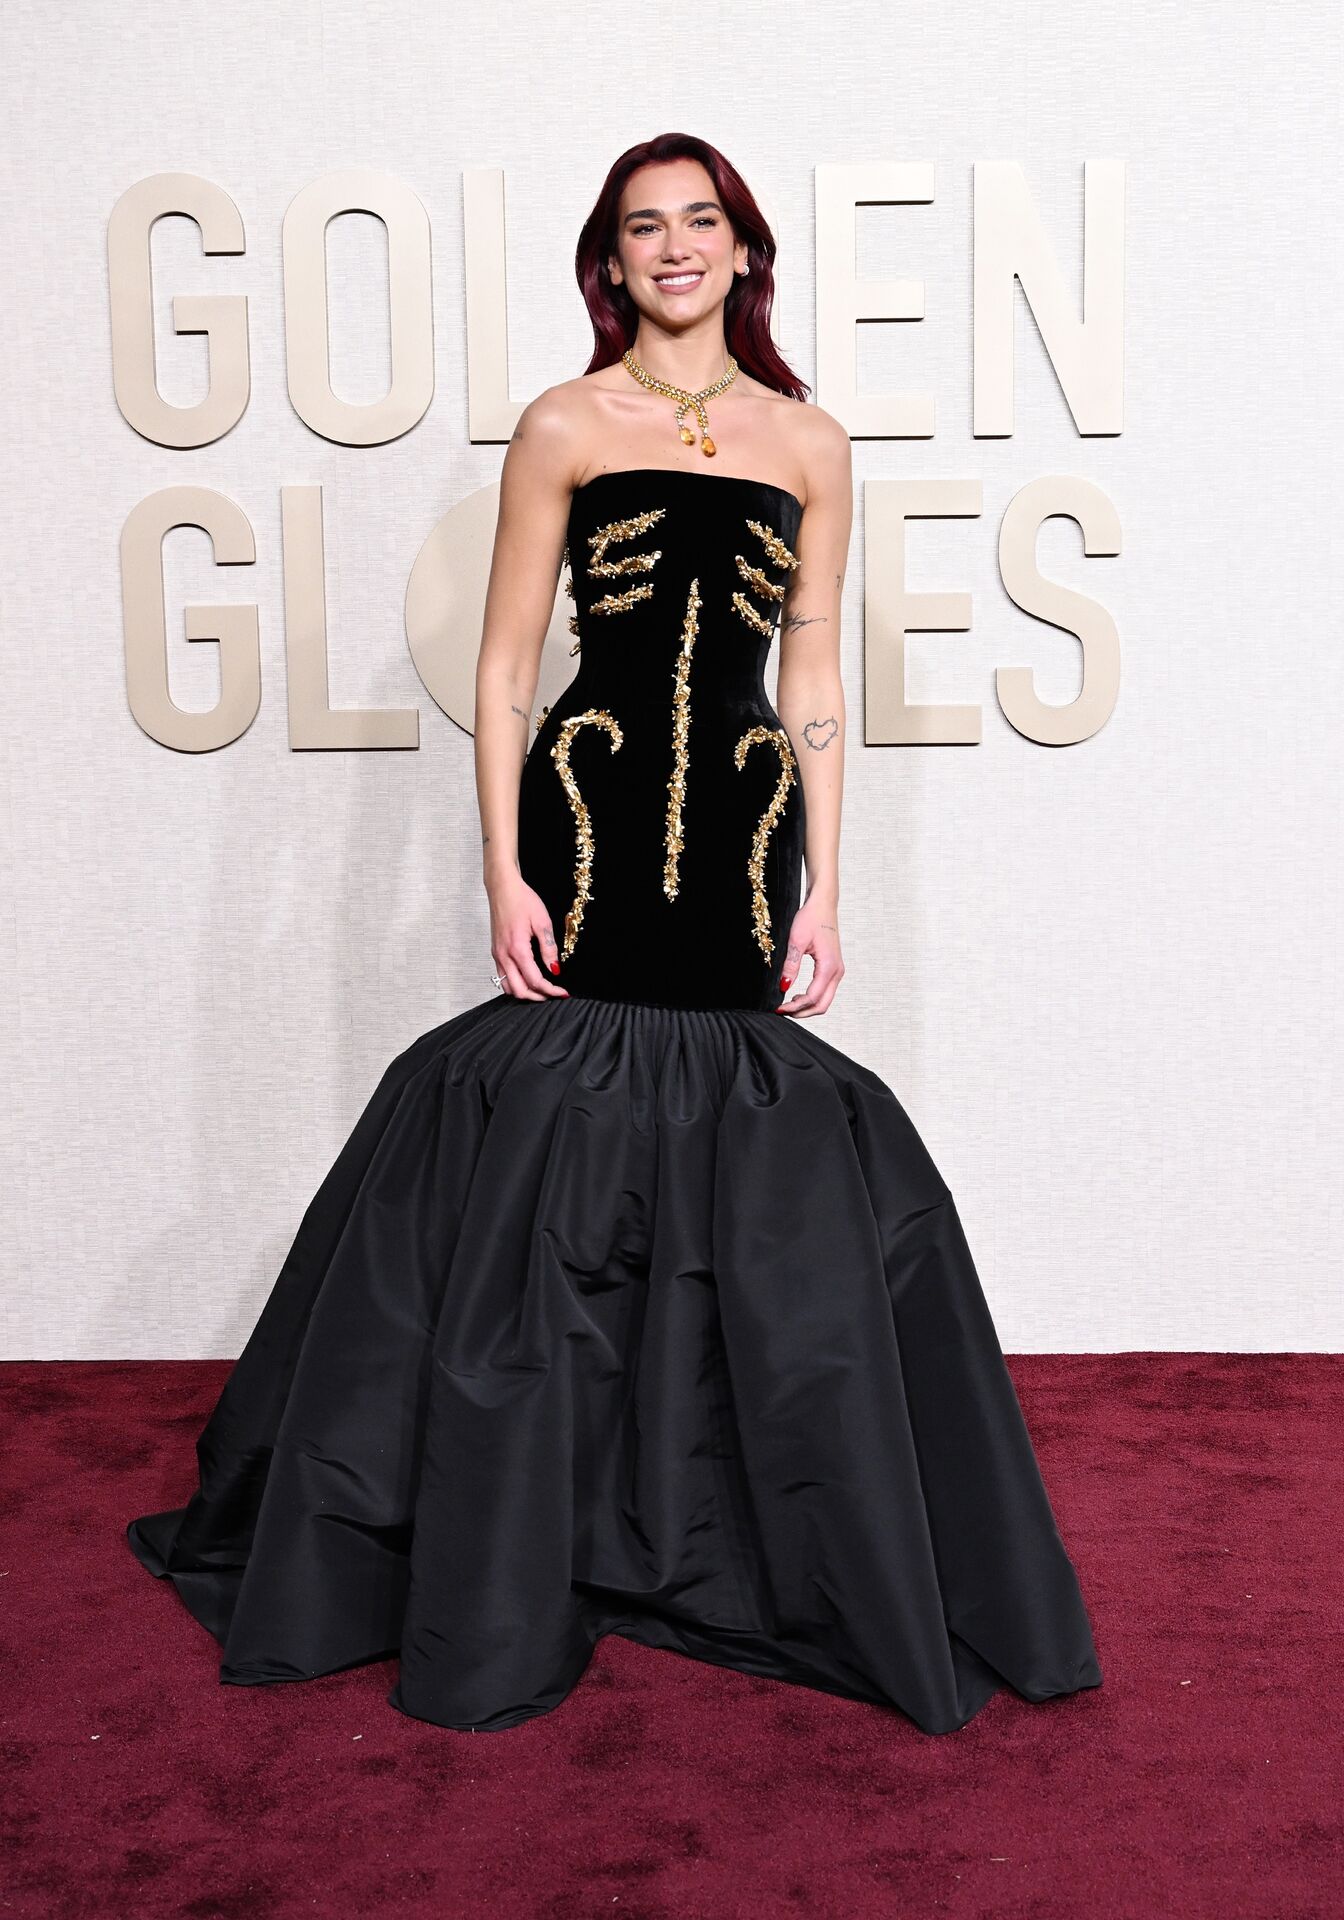 Dua Lipa at the 81st Golden Globe Awards held at the Beverly Hilton Hotel on January 7, 2024 in Beverly Hills, California. *Editorial Use Only* CAP/HFPA/PLF HFPA via Capital Pictures